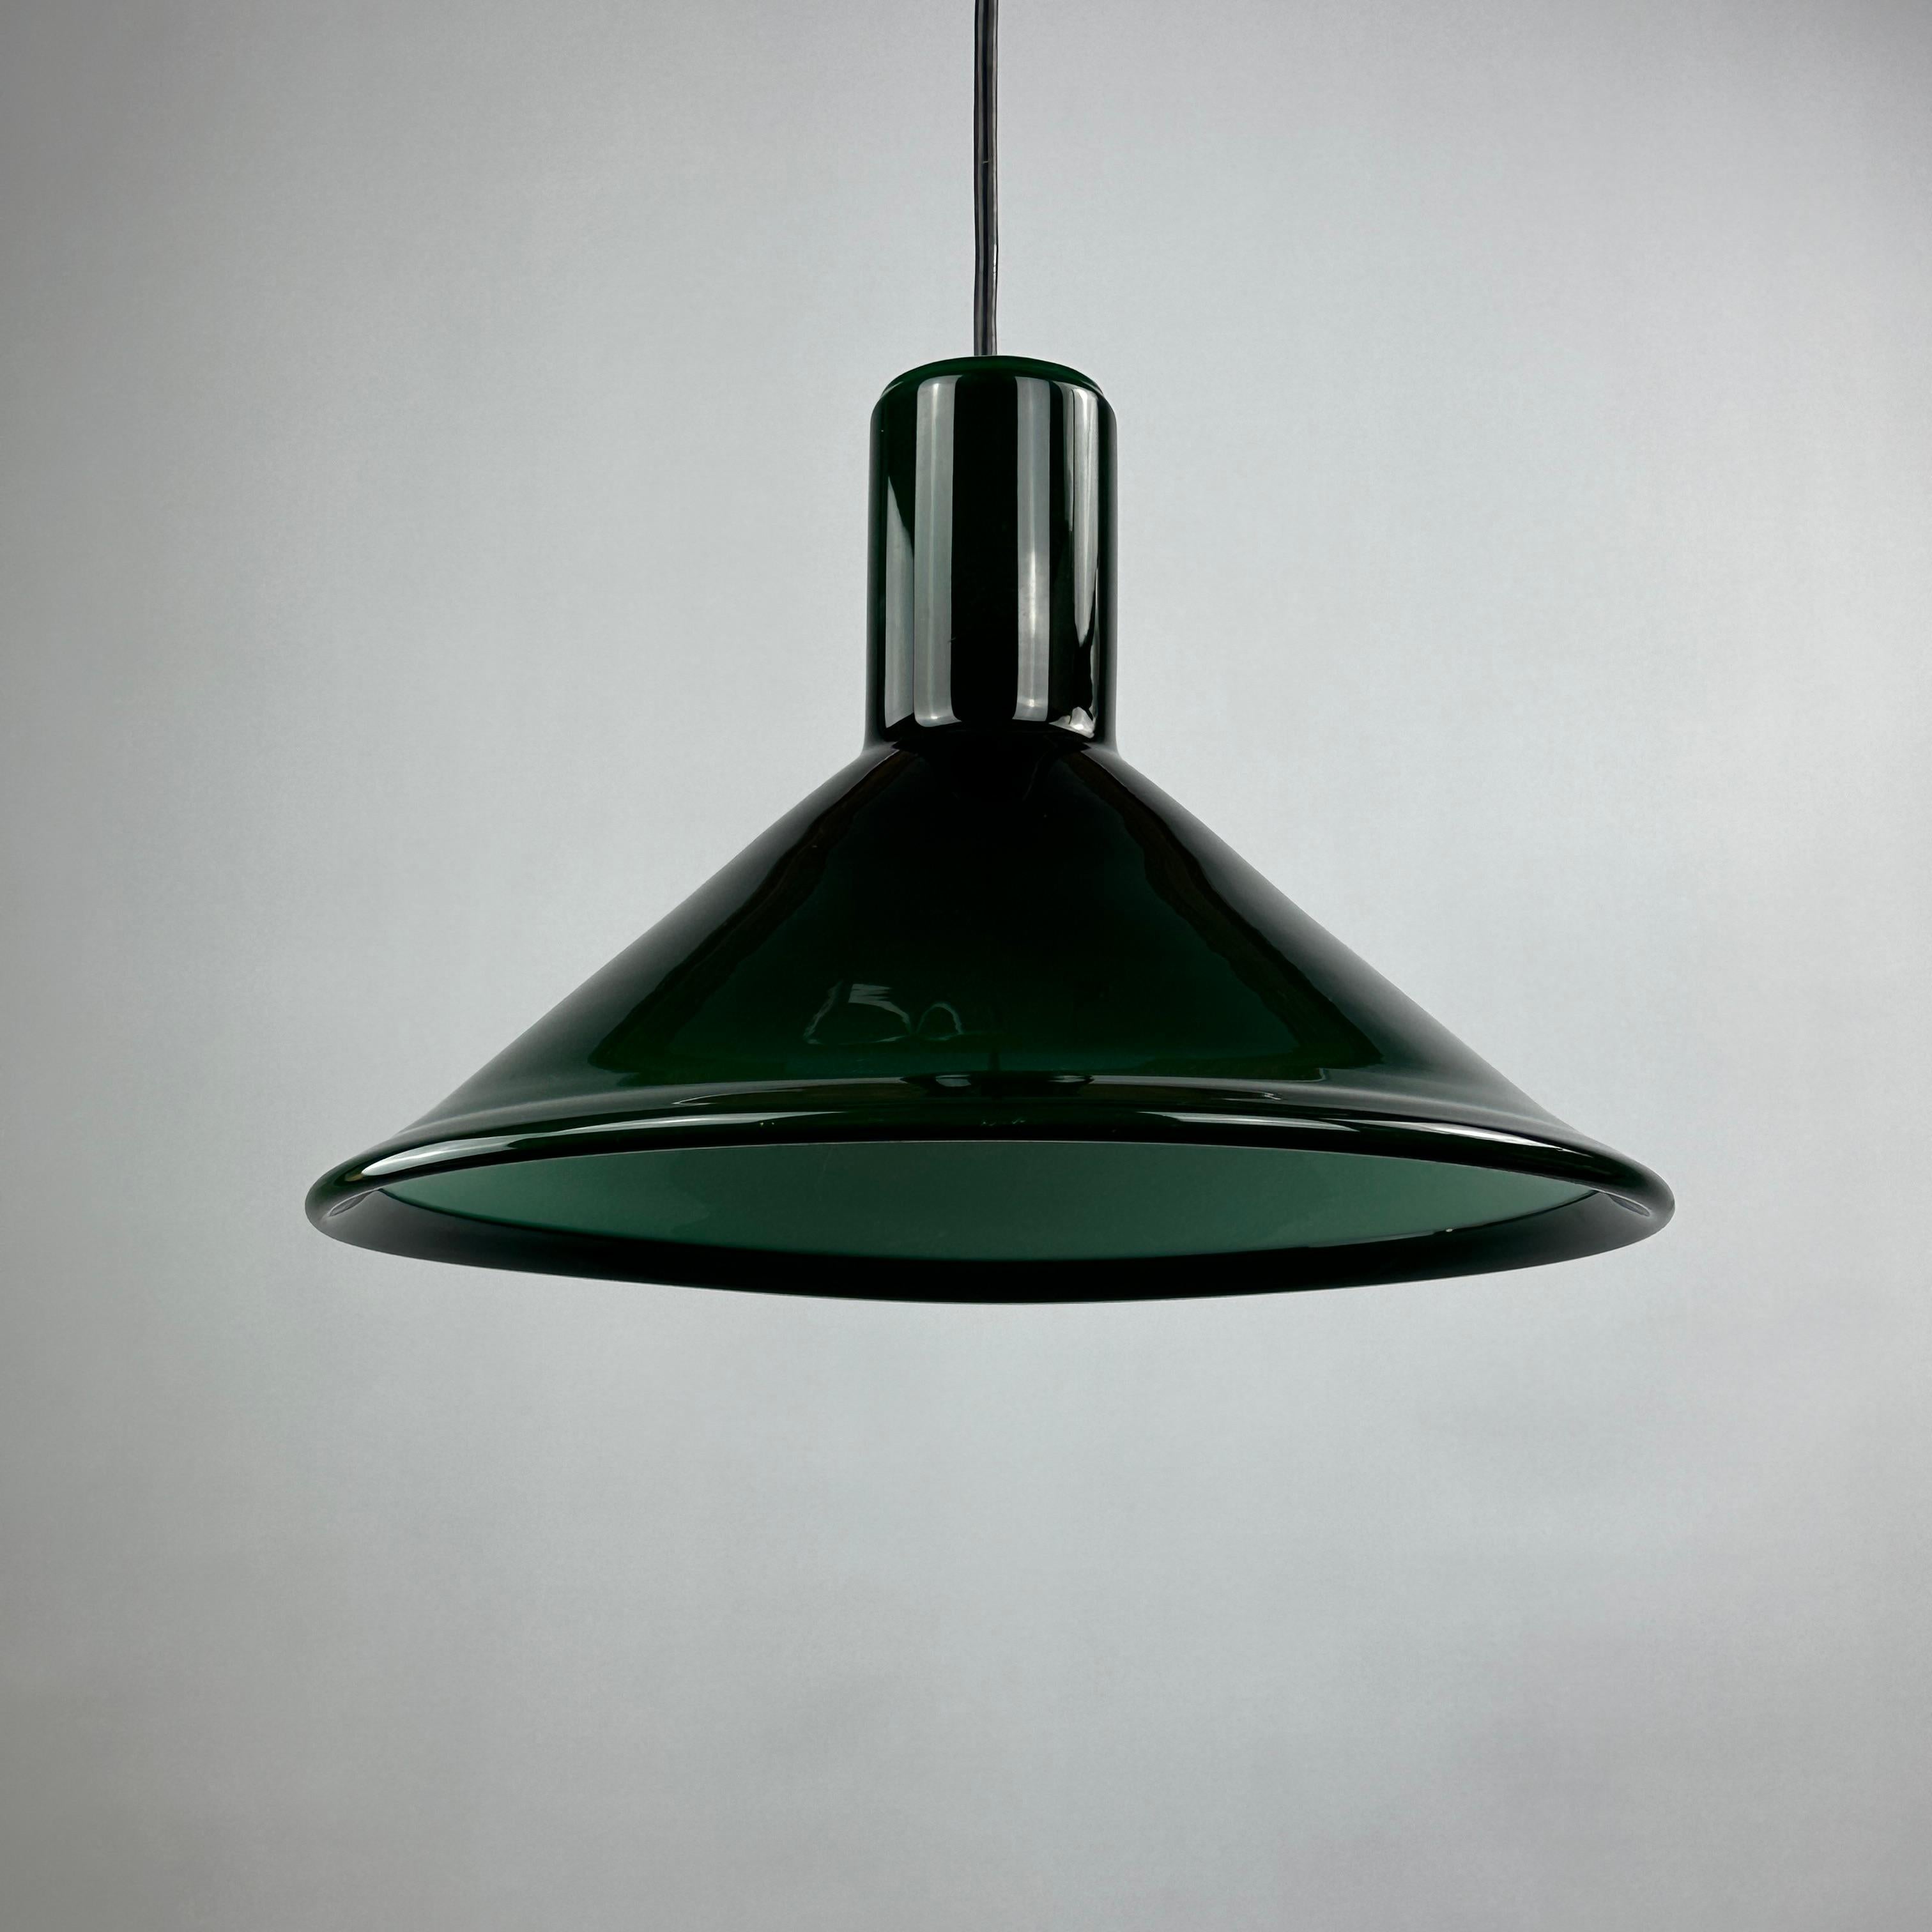 Green Danish glass pendant light Model P & T by Michael Bang for Holmegaard 1972 For Sale 3